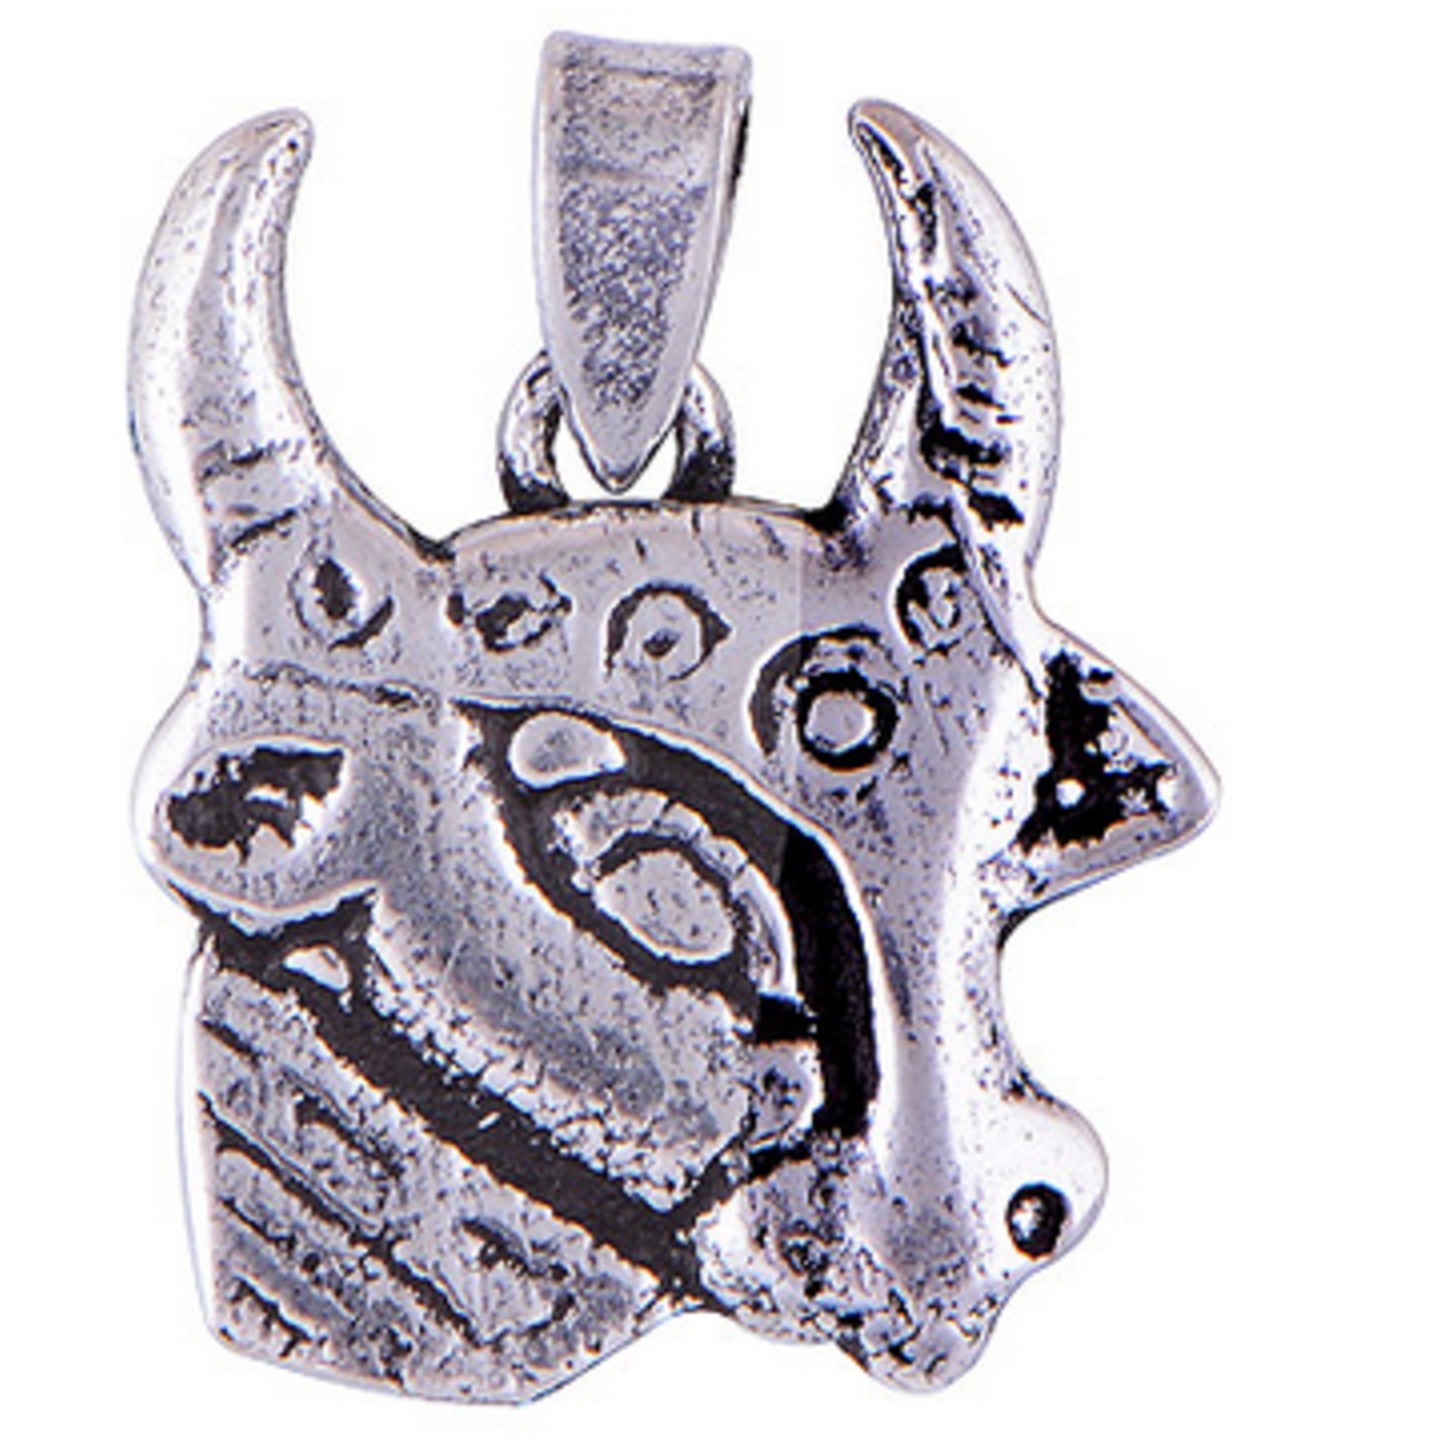 The Holy Cow Silver Pendant